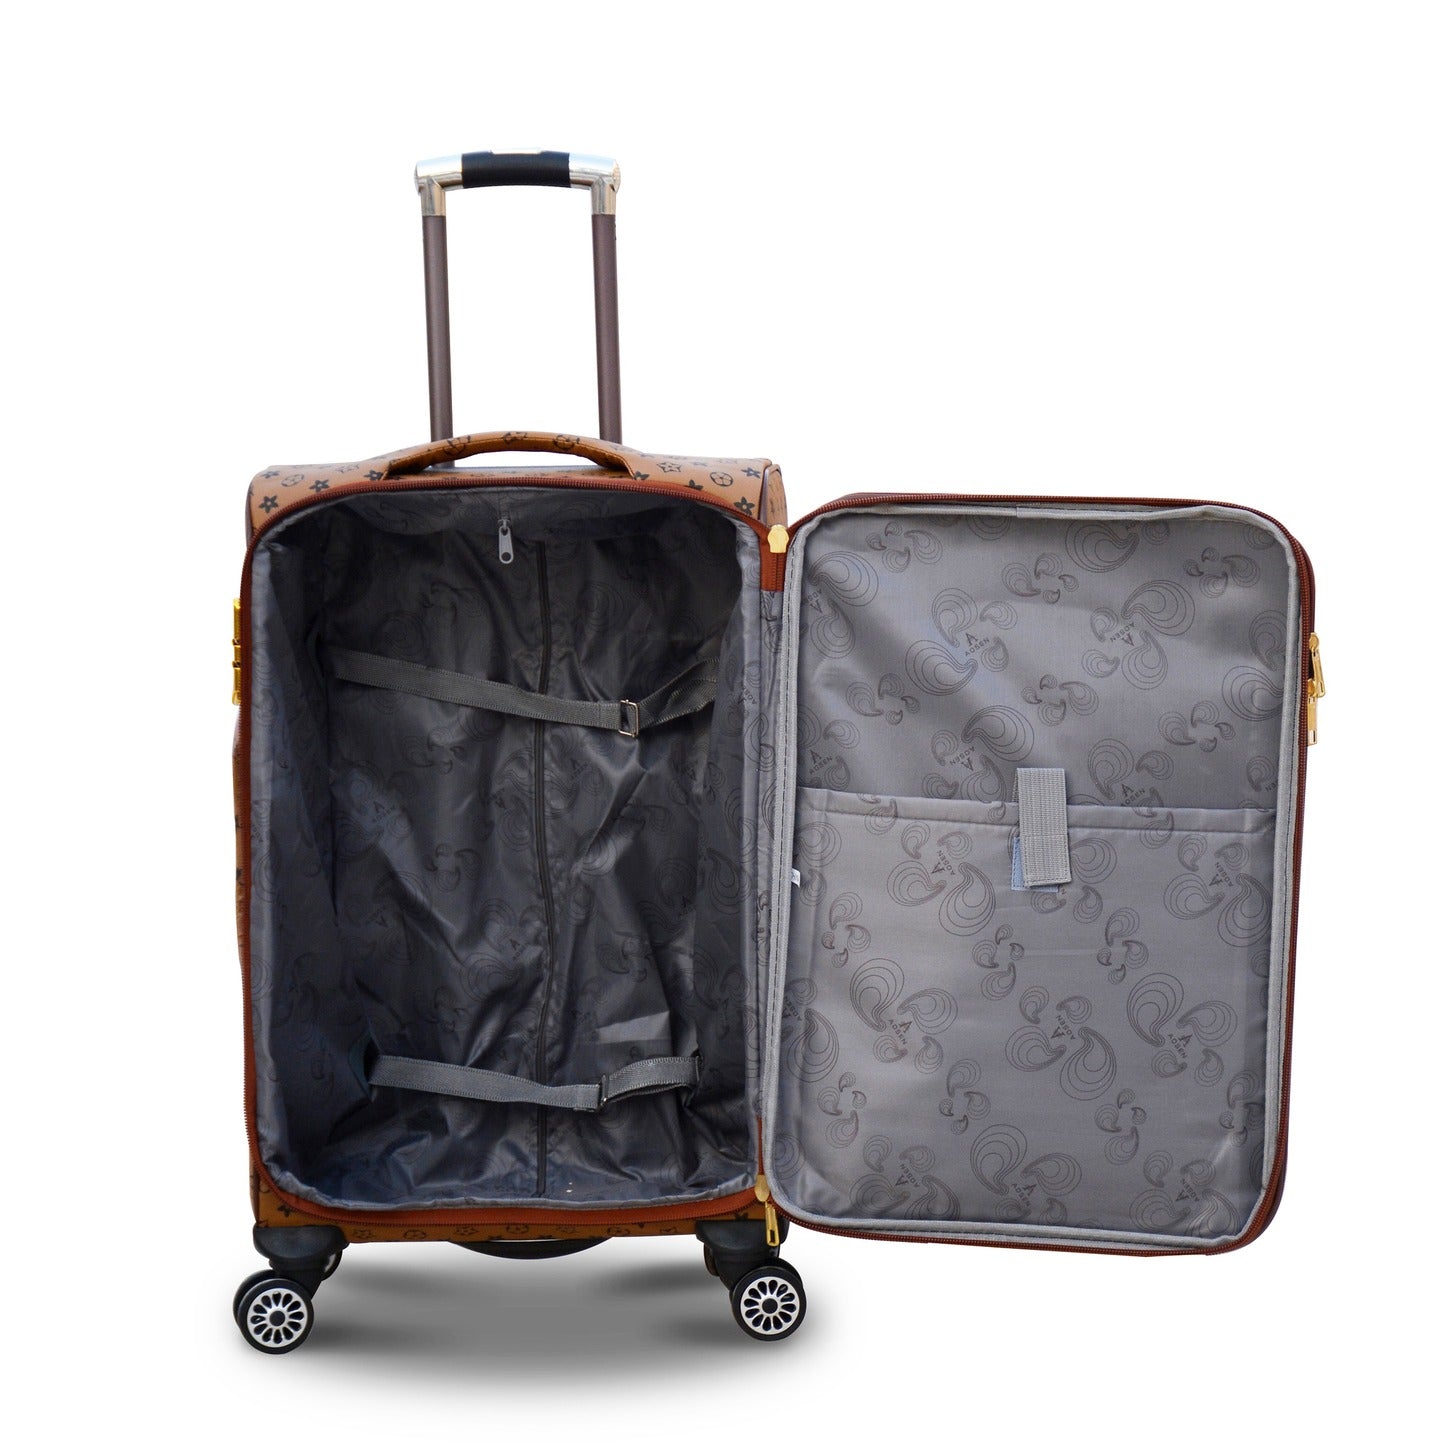 20" Light Brown Colour LVR PU Leather Luggage Lightweight Soft Material Carry On Trolley Bag with Spinner Wheel